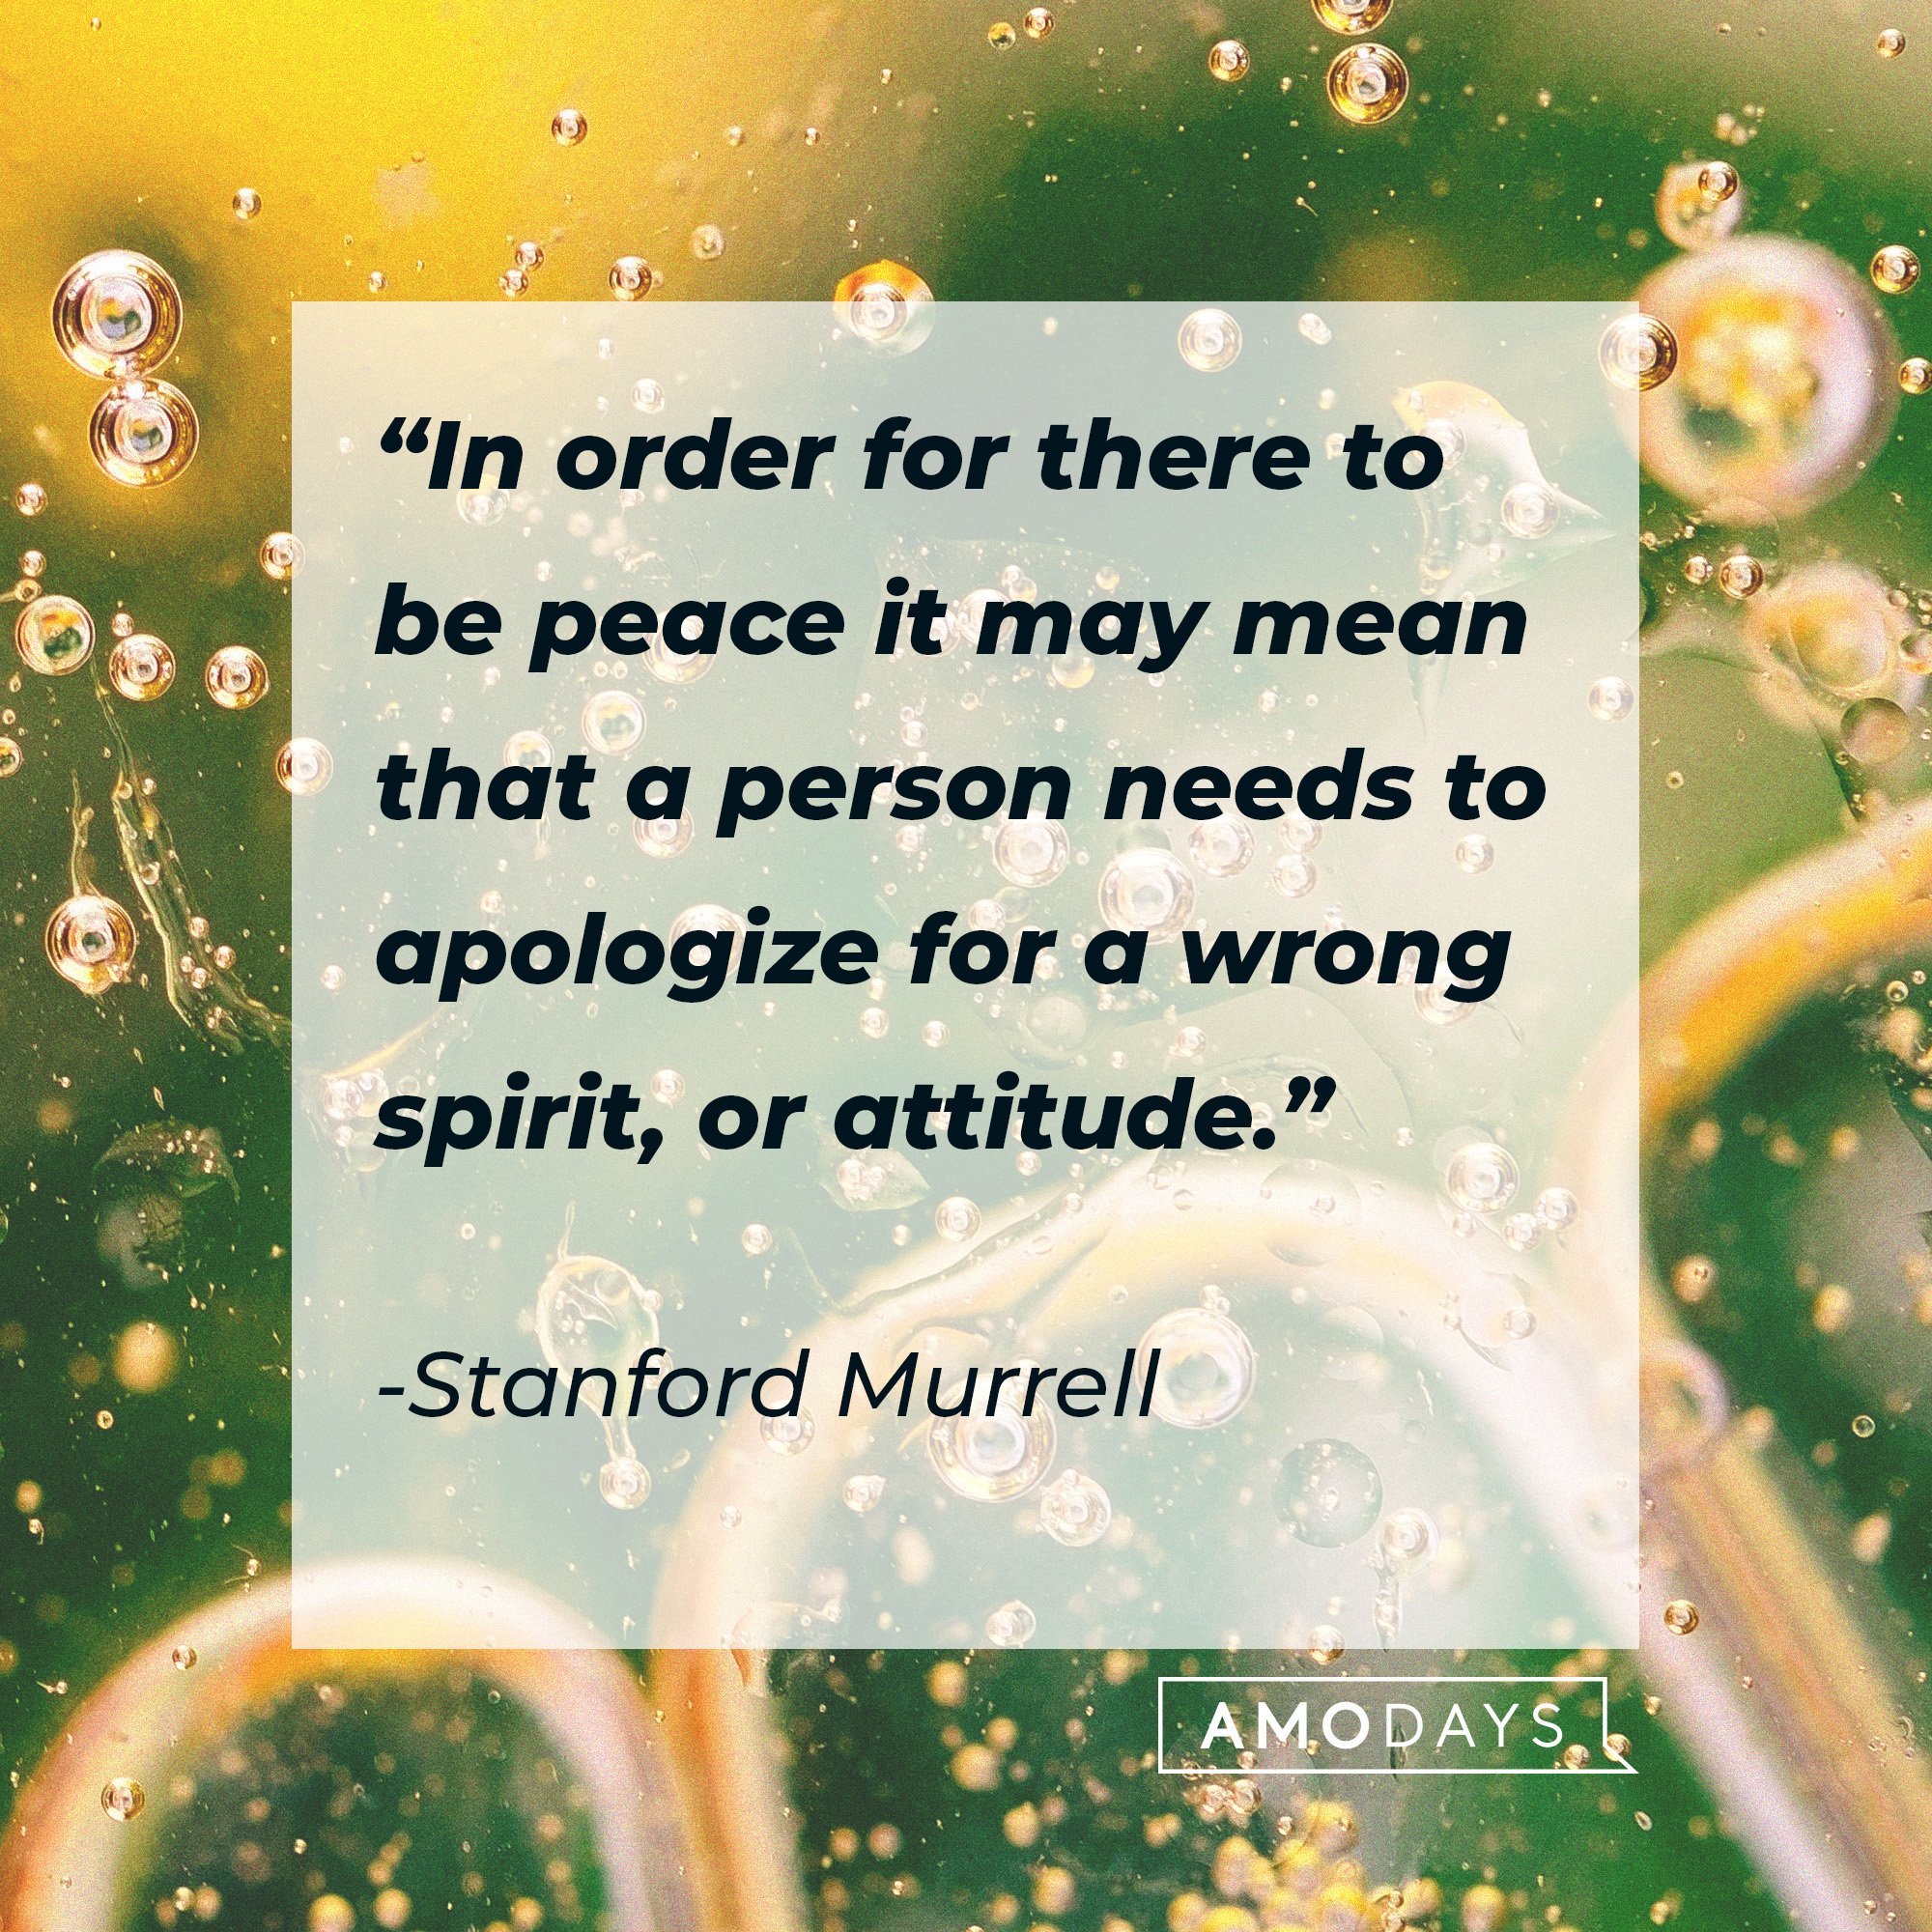 Stanford Murrell's quote: “In order for there to be peace it may mean that a person needs to apologize for a wrong spirit, or attitude.” | Image: AmoDays